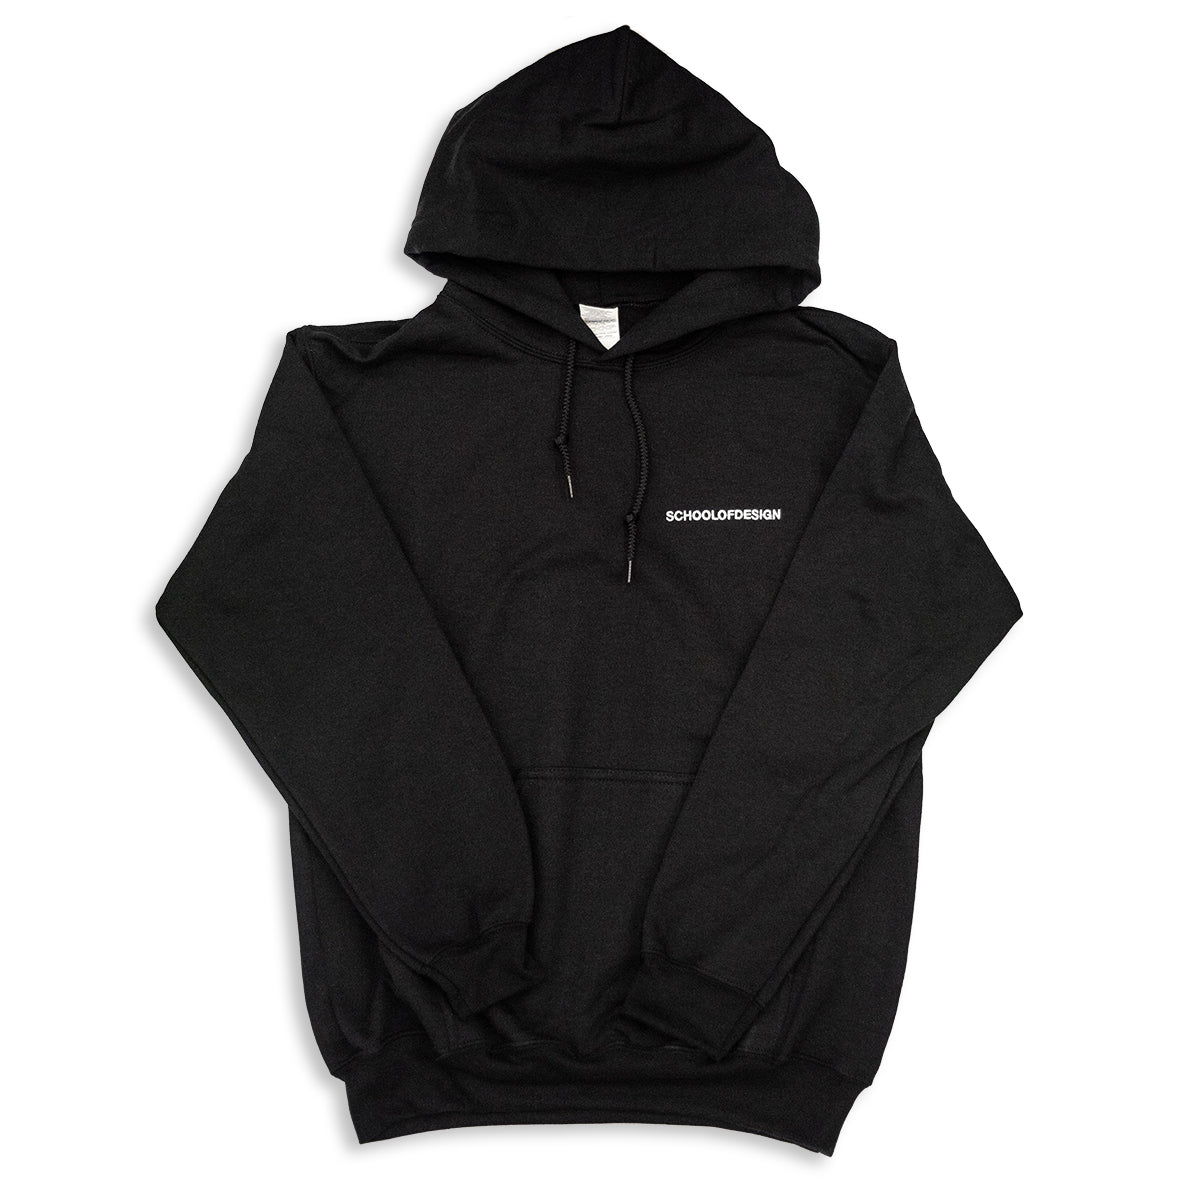 100% cotton black pullover hoodie with school of design text on left chest